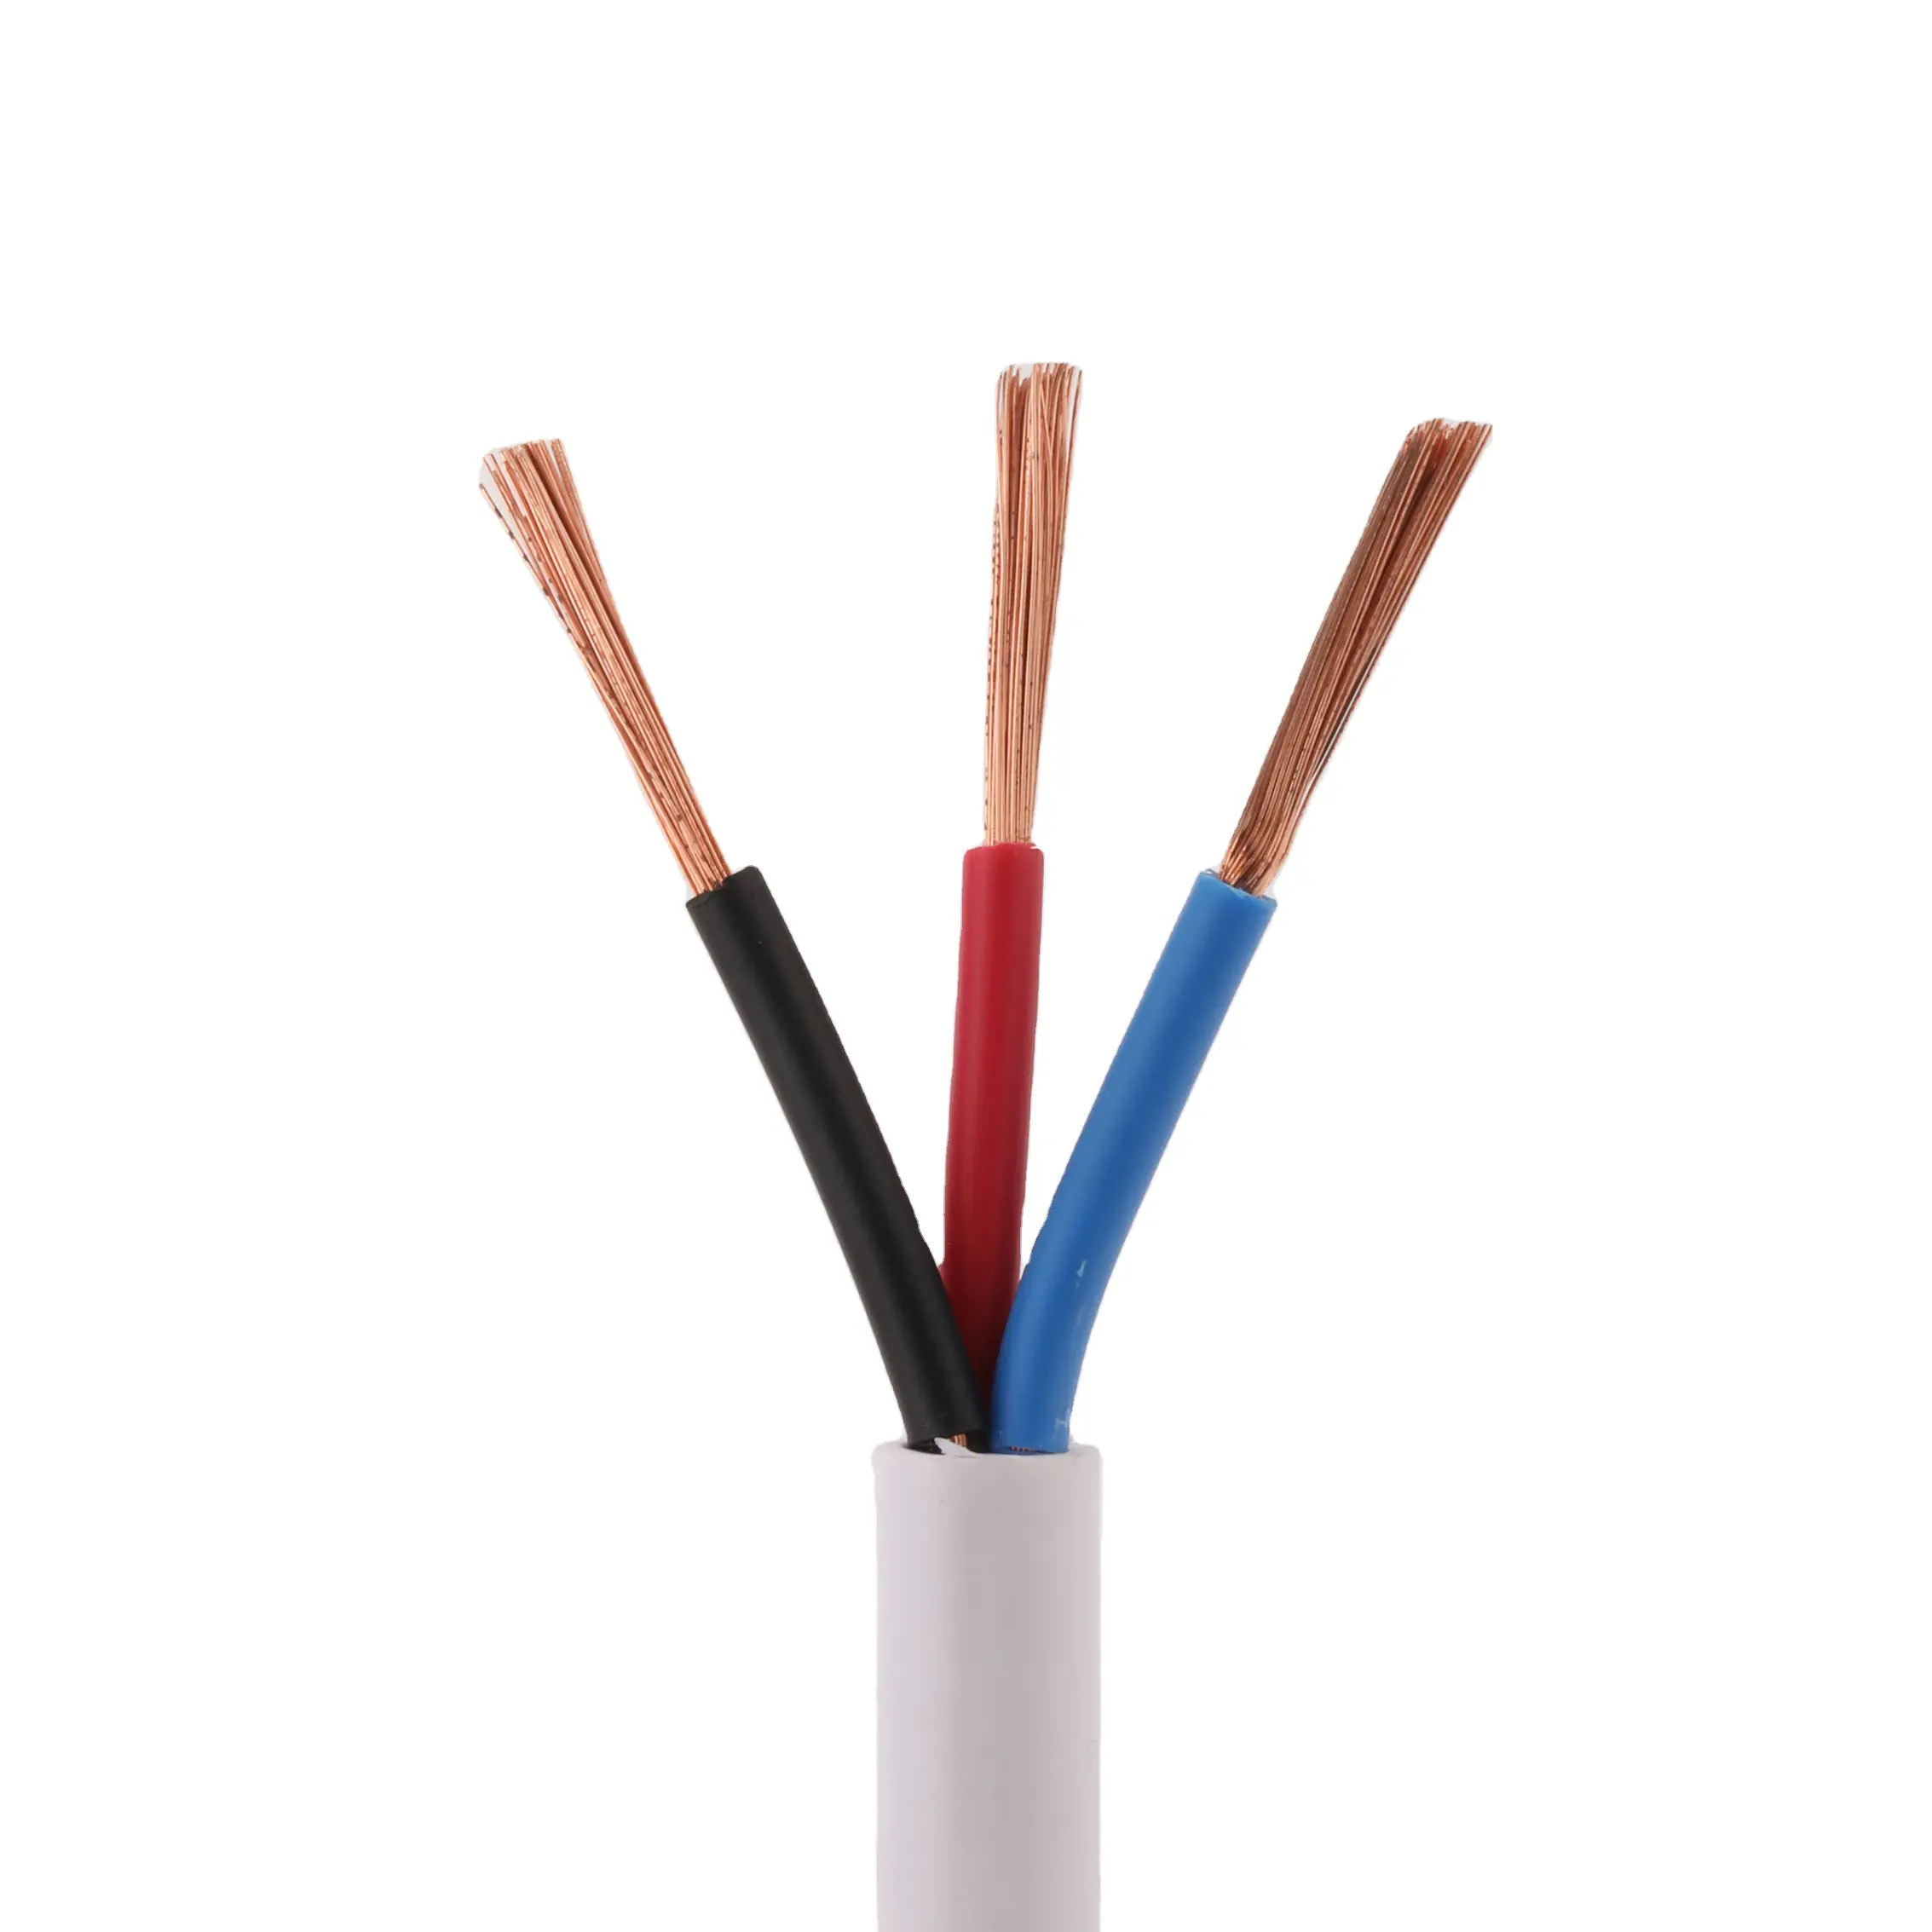 Flexible Flat Cable 2.5mm electric cable house wire copper cpnductor pvc insulated multicore electric wire